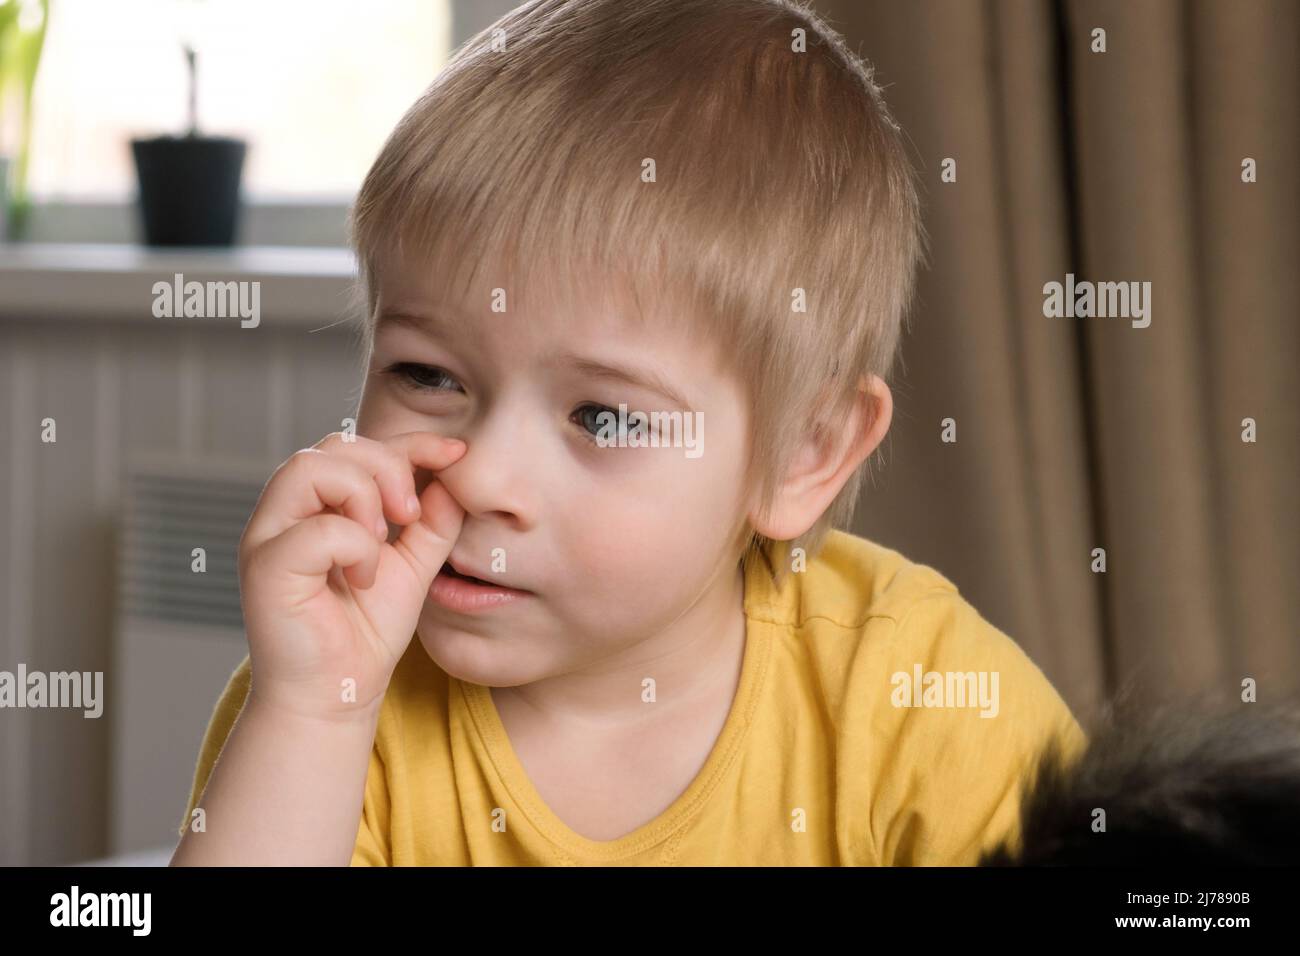 https://c8.alamy.com/comp/2J7890B/child-boy-with-blonde-hair-baby-with-finger-in-his-nose-portrait-3-years-old-kid-picking-nose-boy-toddler-at-home-early-age-children-development-2J7890B.jpg